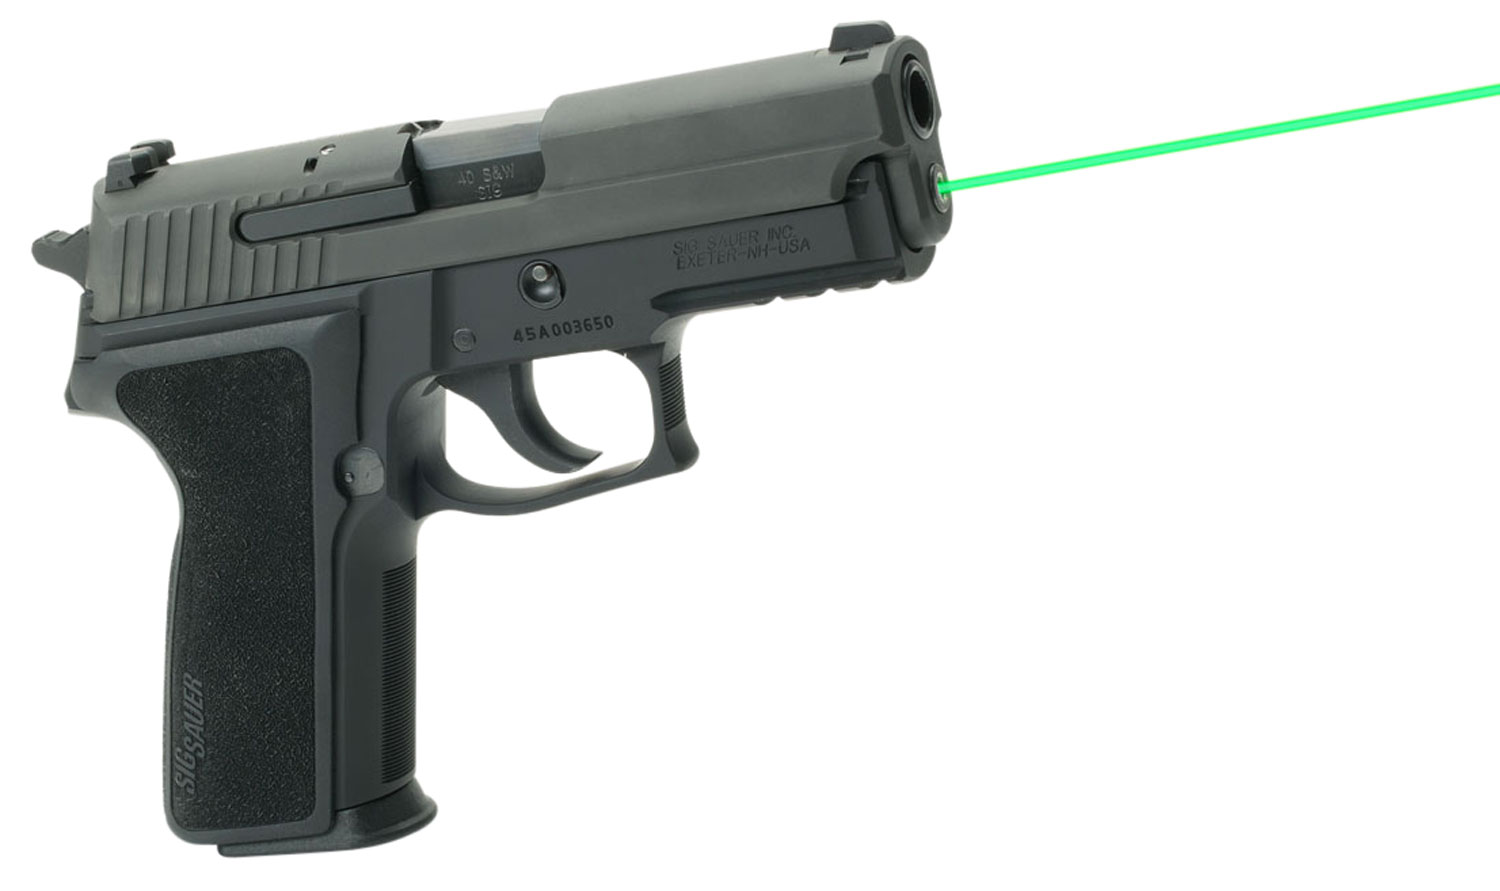 Green Guide Rod Laser Sight - SIG SAUER P228/P229 Model Enhancements-img-0